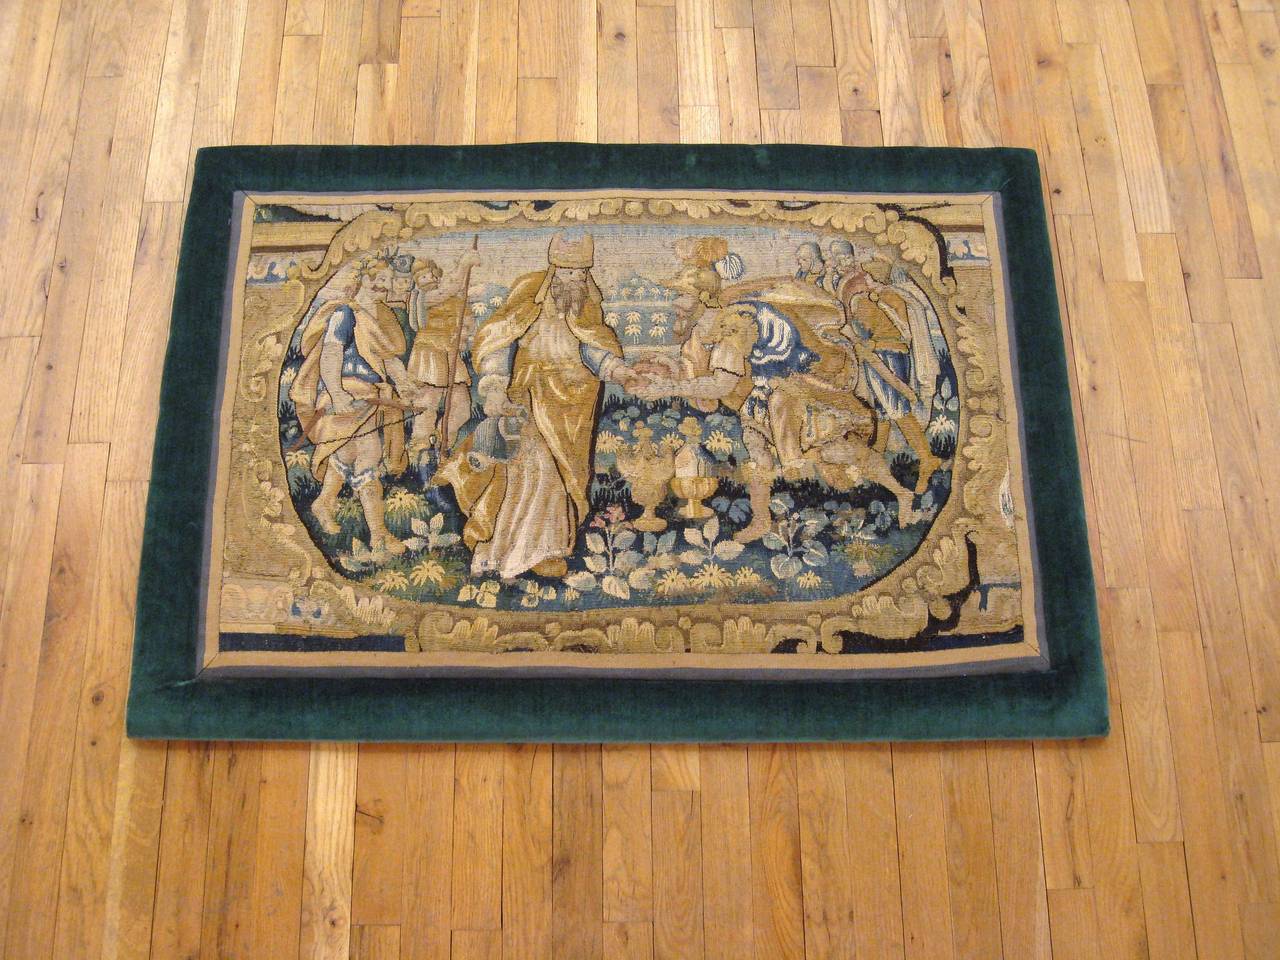 A Flemish framed historical tapestry from the 18th century, which is believed to be from a small set of the Life of Alexander the Great envisioning a scene in which the conqueror is having a journey of victory against the Persians and is meeting the